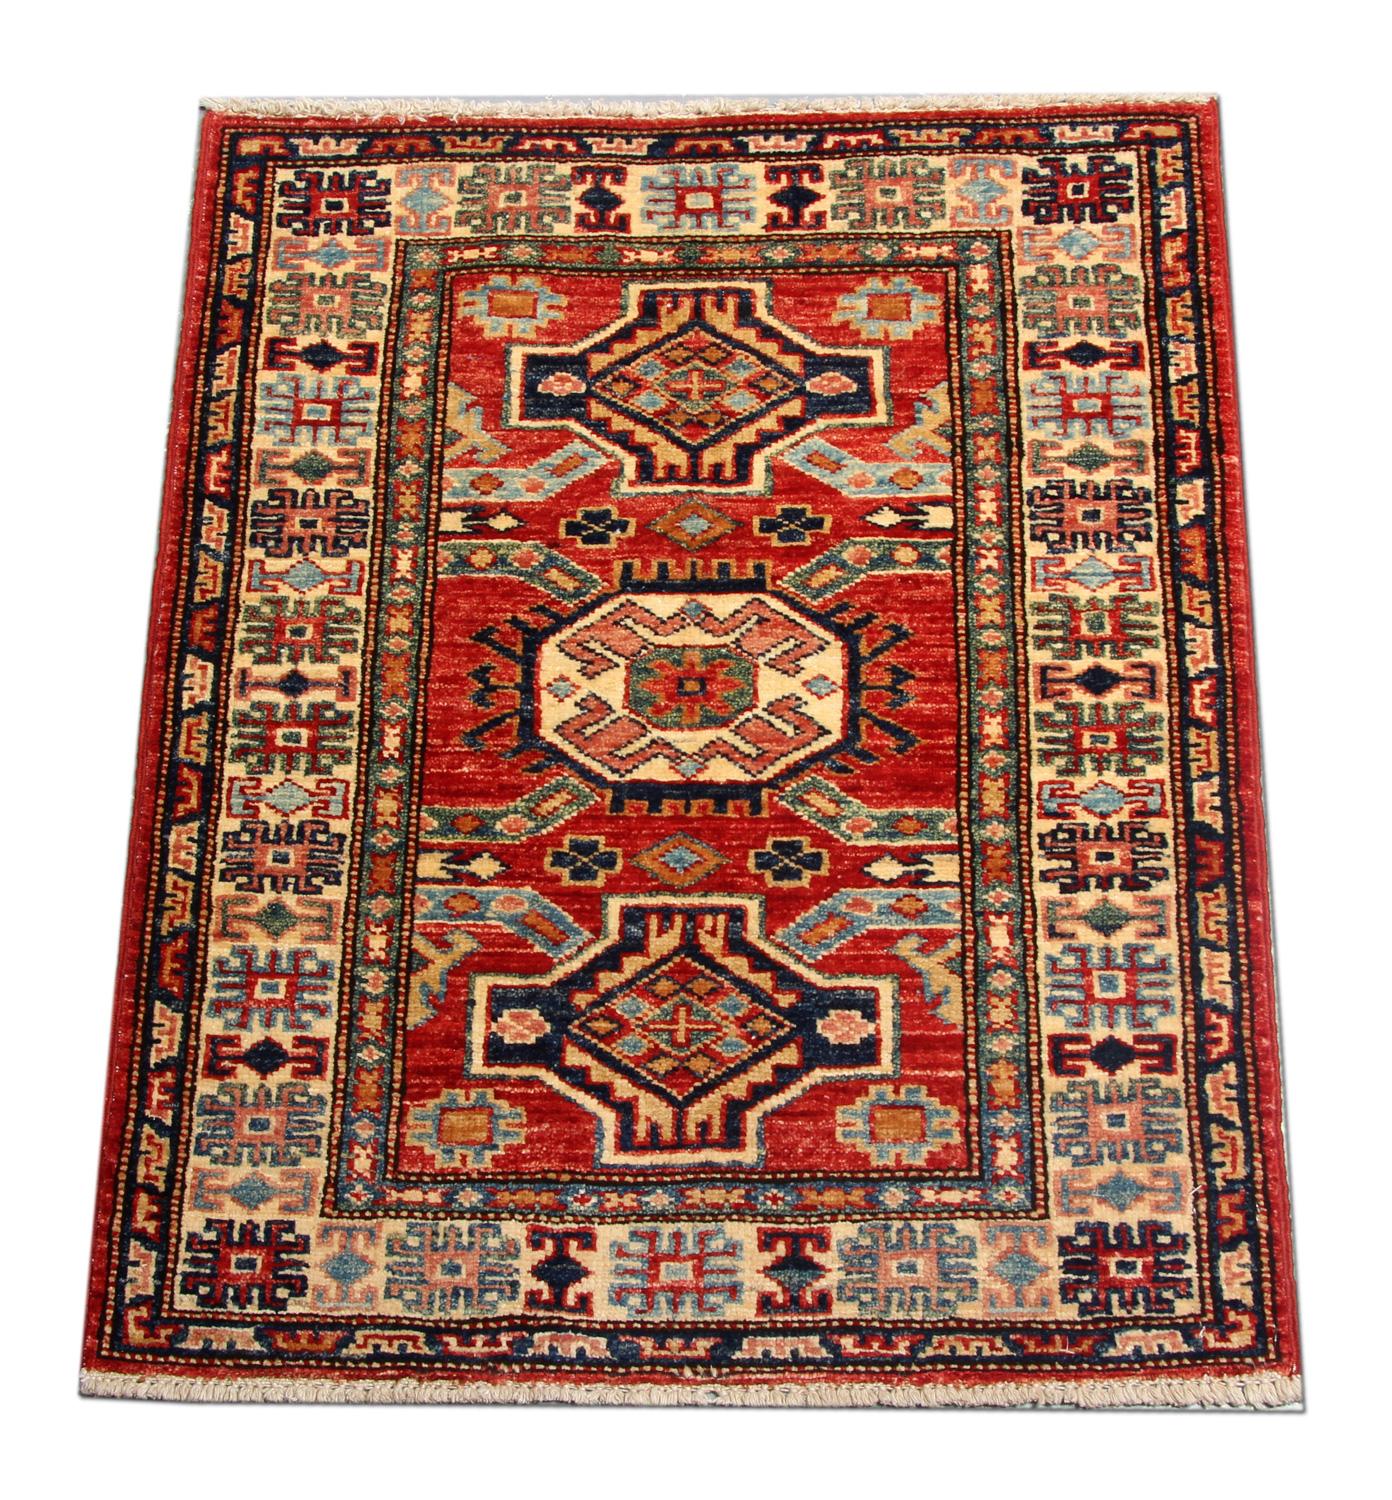 These small new traditional handmade rugs feature designs from the Kazak region. A conventional tribal rug is famous in the part of Kazak Area. Afghan weavers have made this handwoven rug of top-quality wool and cotton. This carpet rug features